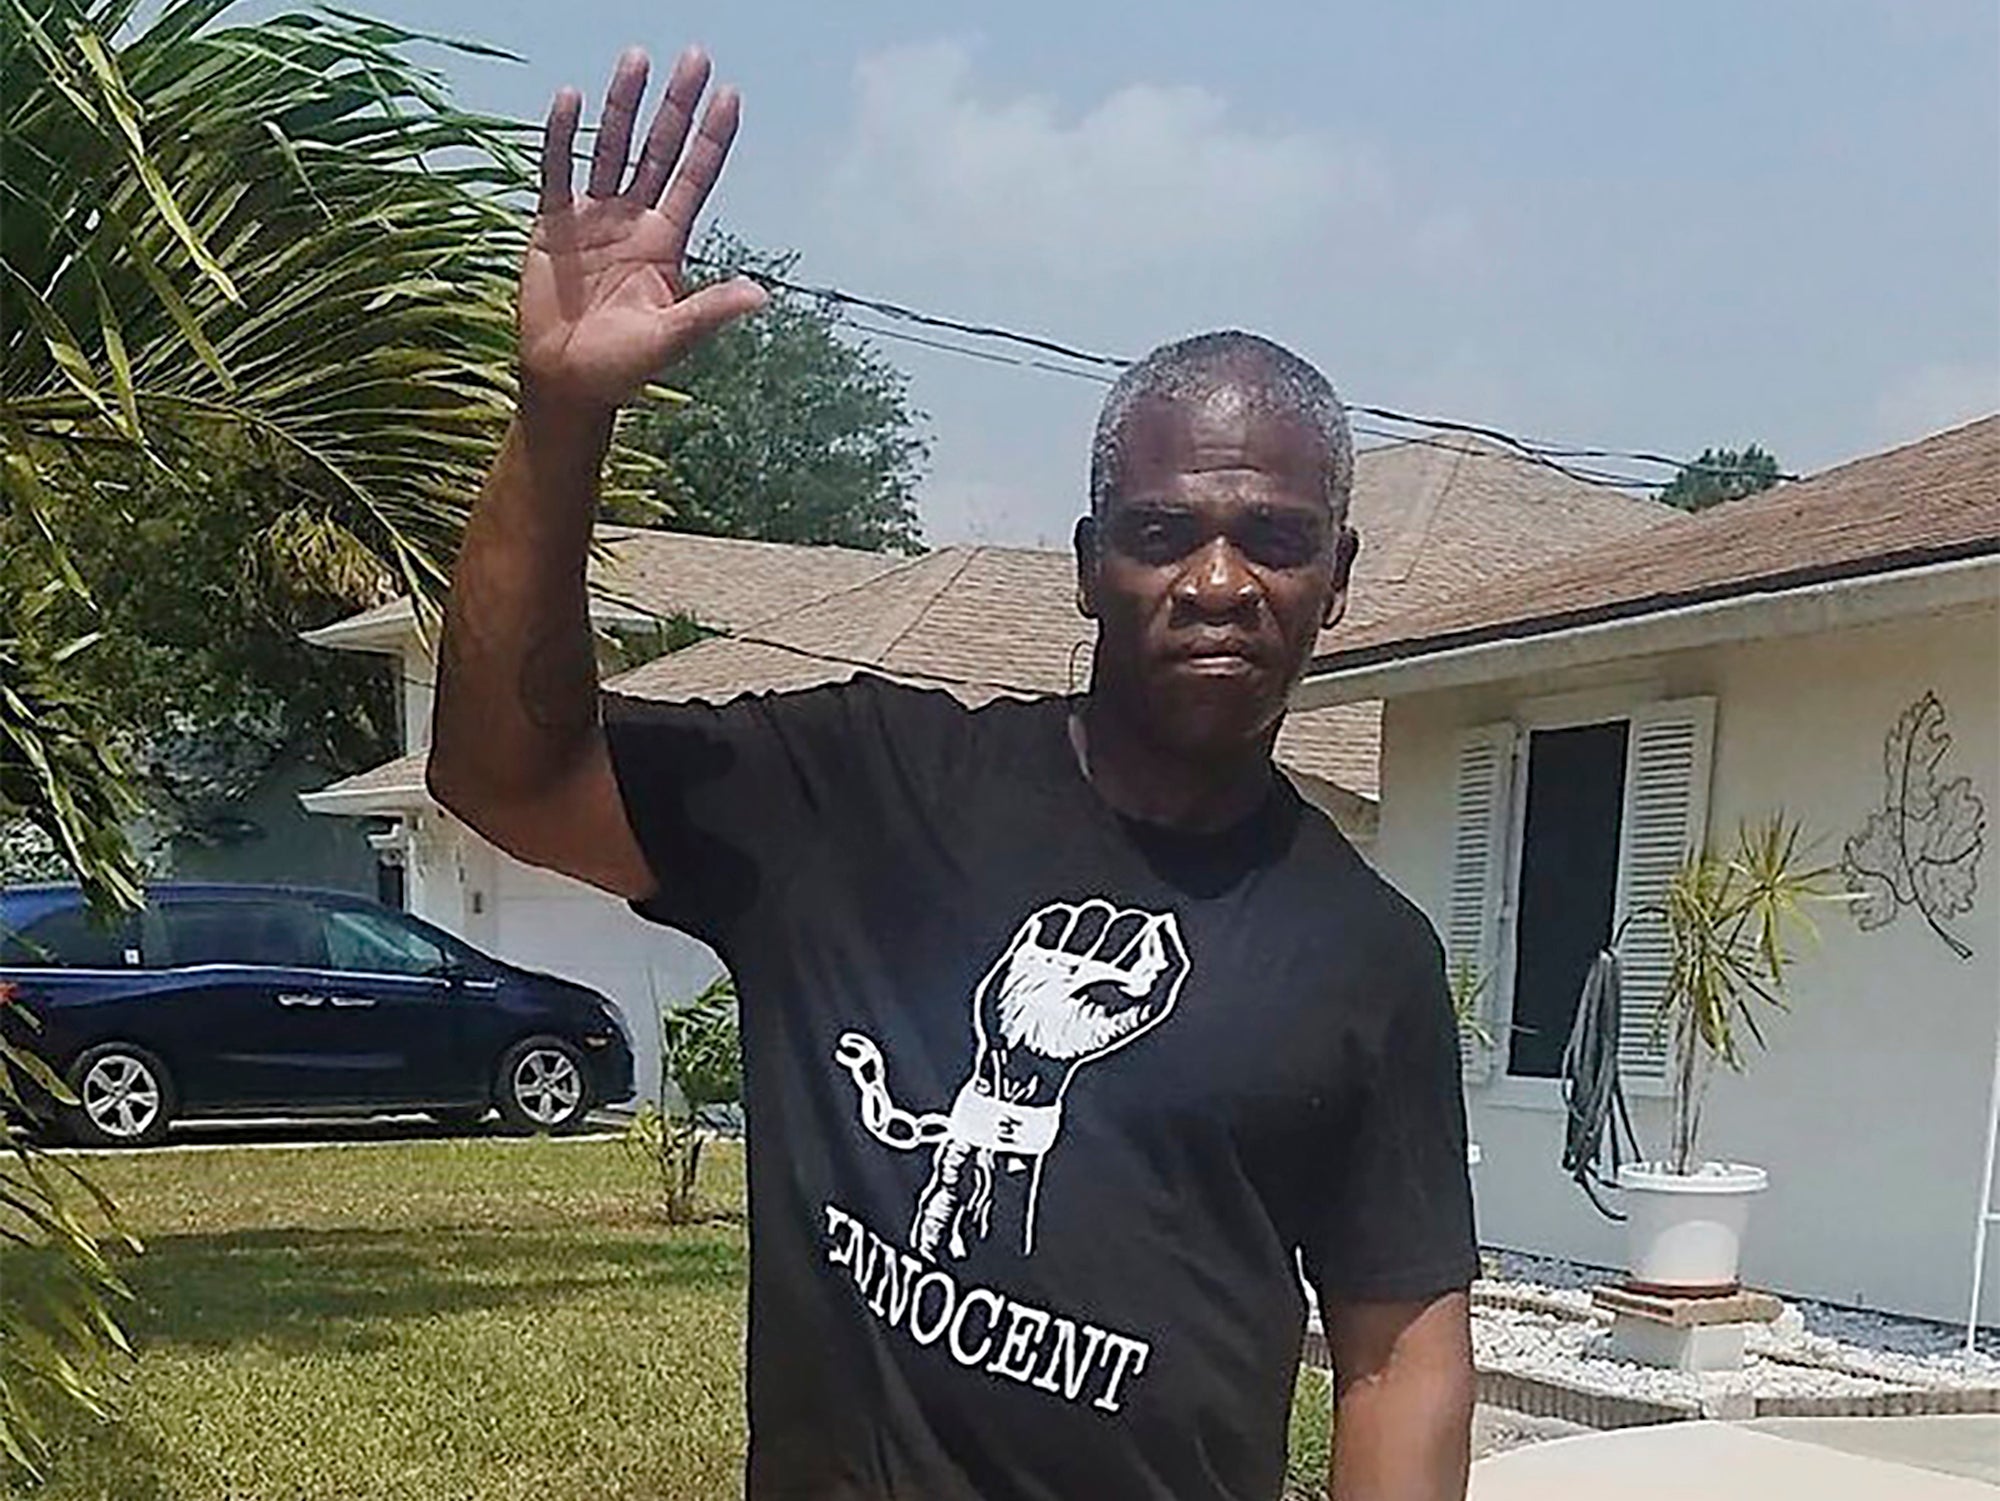 Leonard Cure was committed to reforming his life after his exoneration and was in the process of buying a house